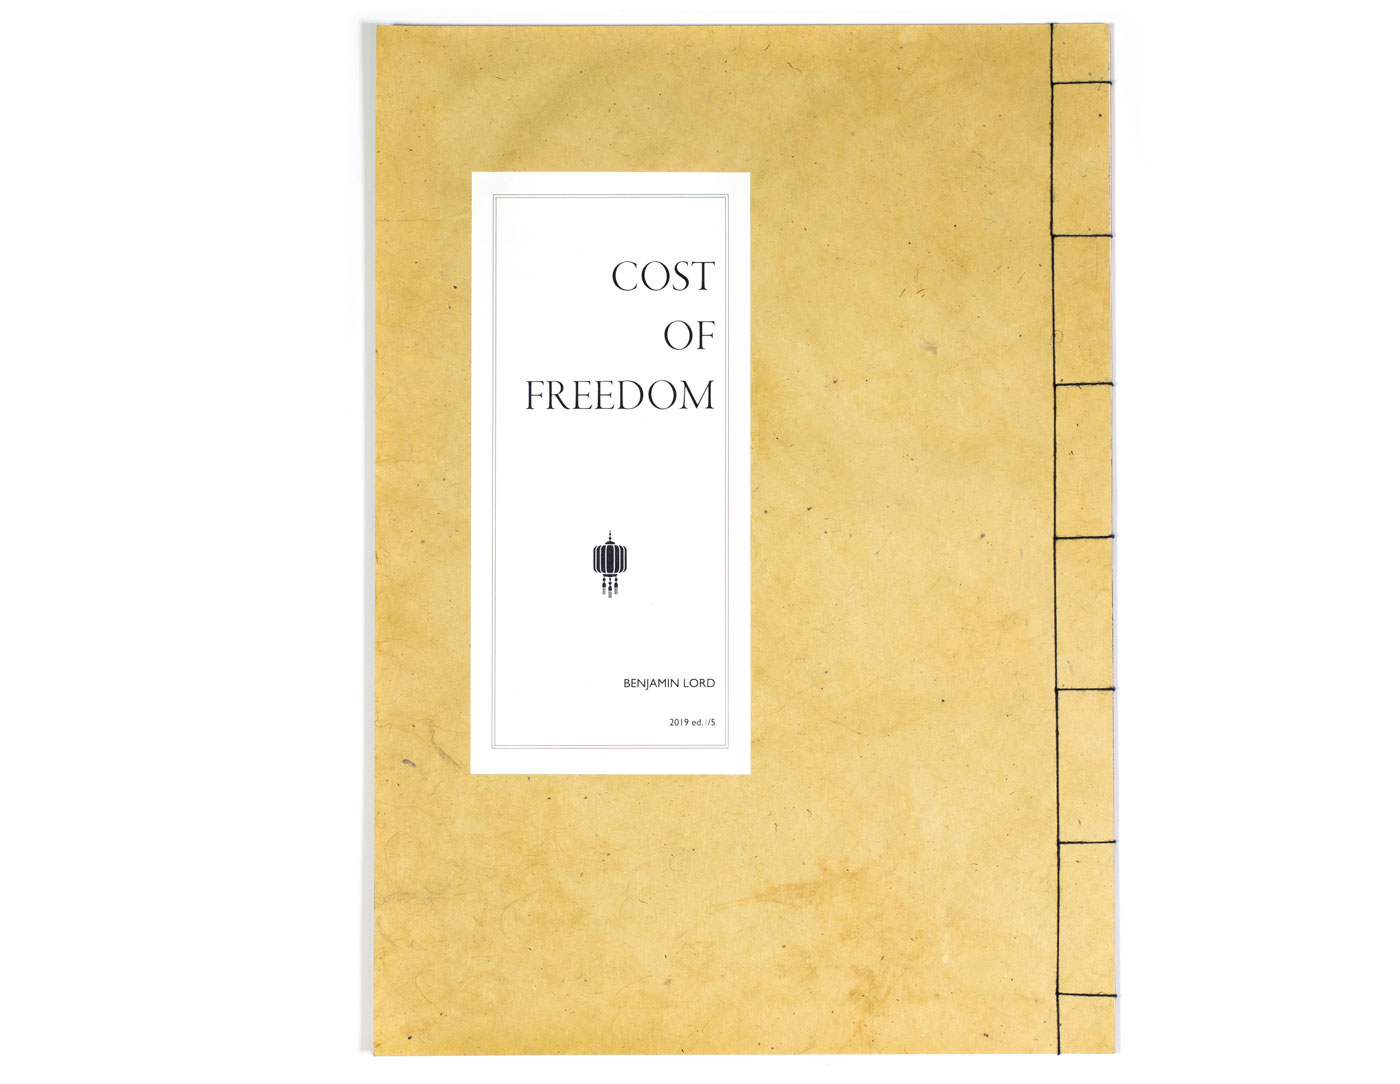 The cover of the book Cost of Freedom